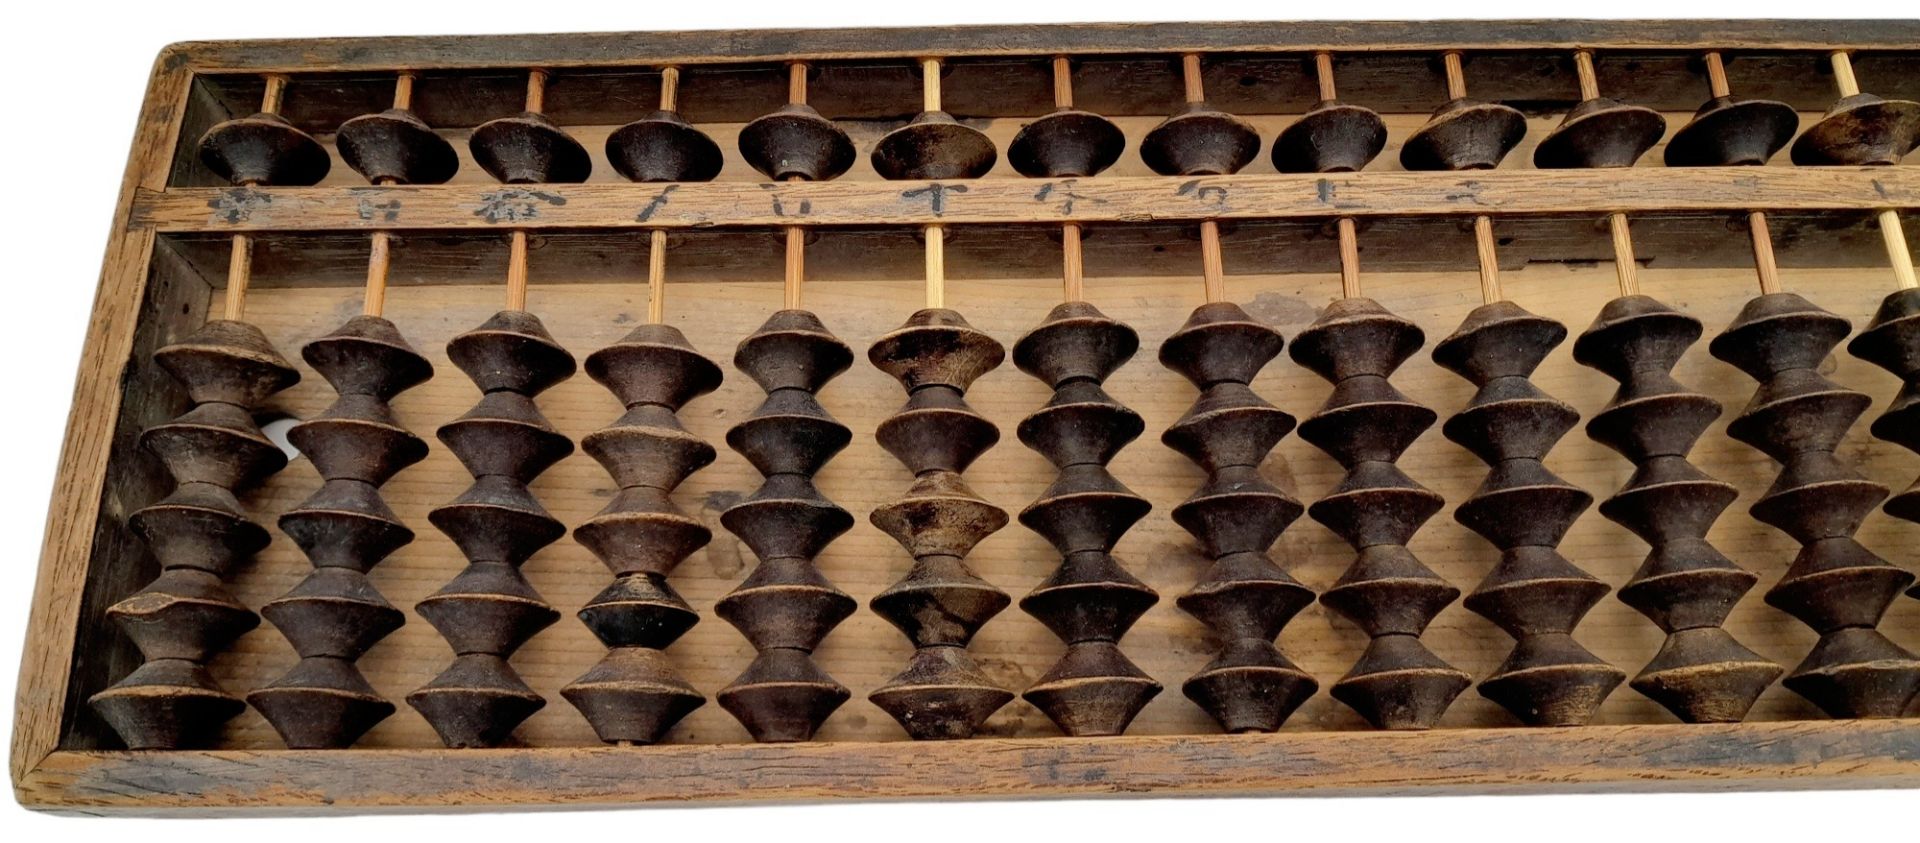 An Antique Chinese Wooden Abacus. 46cm x 12cm. - Image 5 of 6